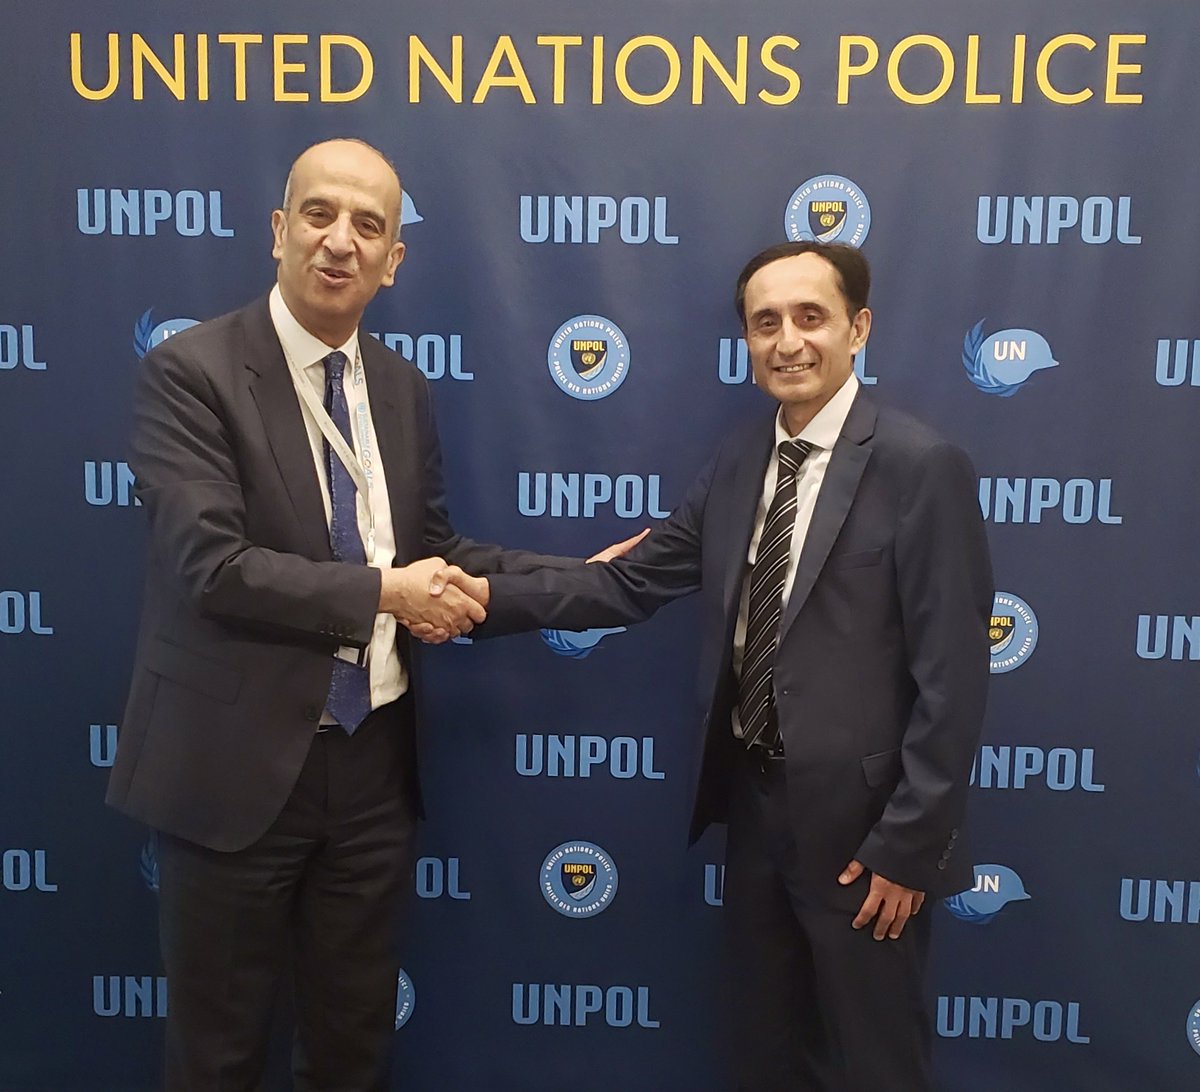 .@UNPOL Adviser Faisal Shahkar was pleased to meet with @UNEgypt Ambassador, H.E. Mr. Osama Mahmoud Abdelkhalek Mahmoud, to discuss his country's strong support to police peacekeeping. Egypt currently contributes 500+ police officers to @UNPeacekeeping, 50 of whom are women. #A4P